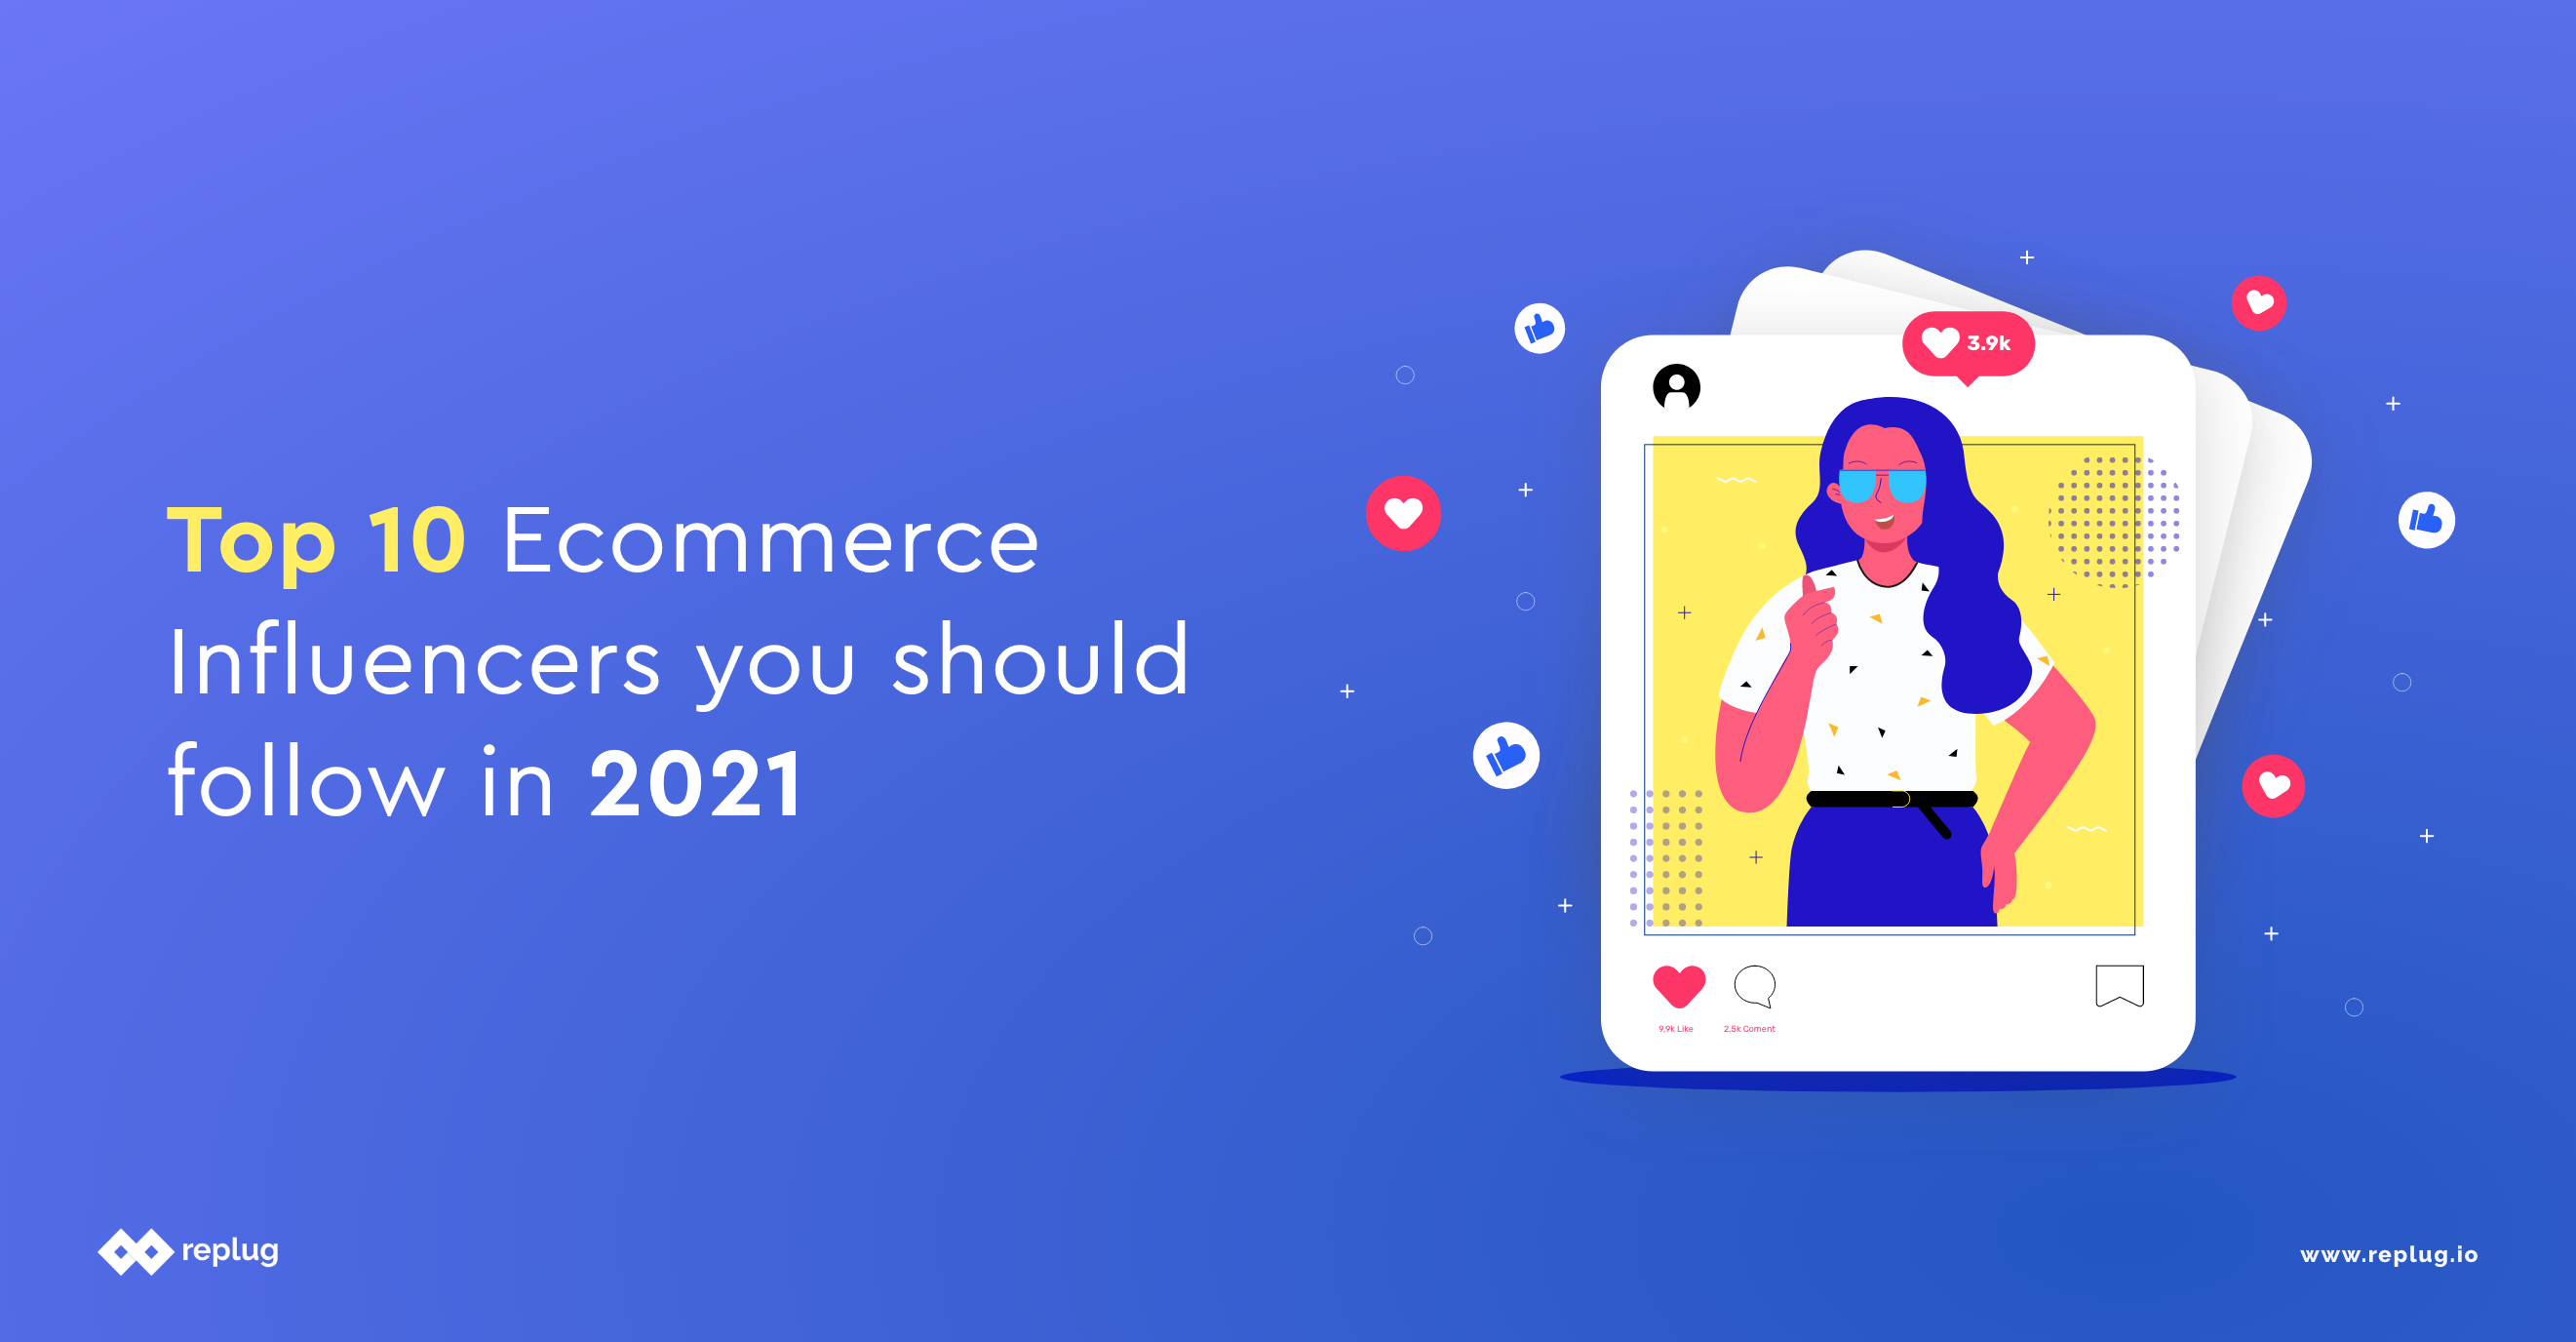 Top 10 Ecommerce Influencers You Should Follow in 2021